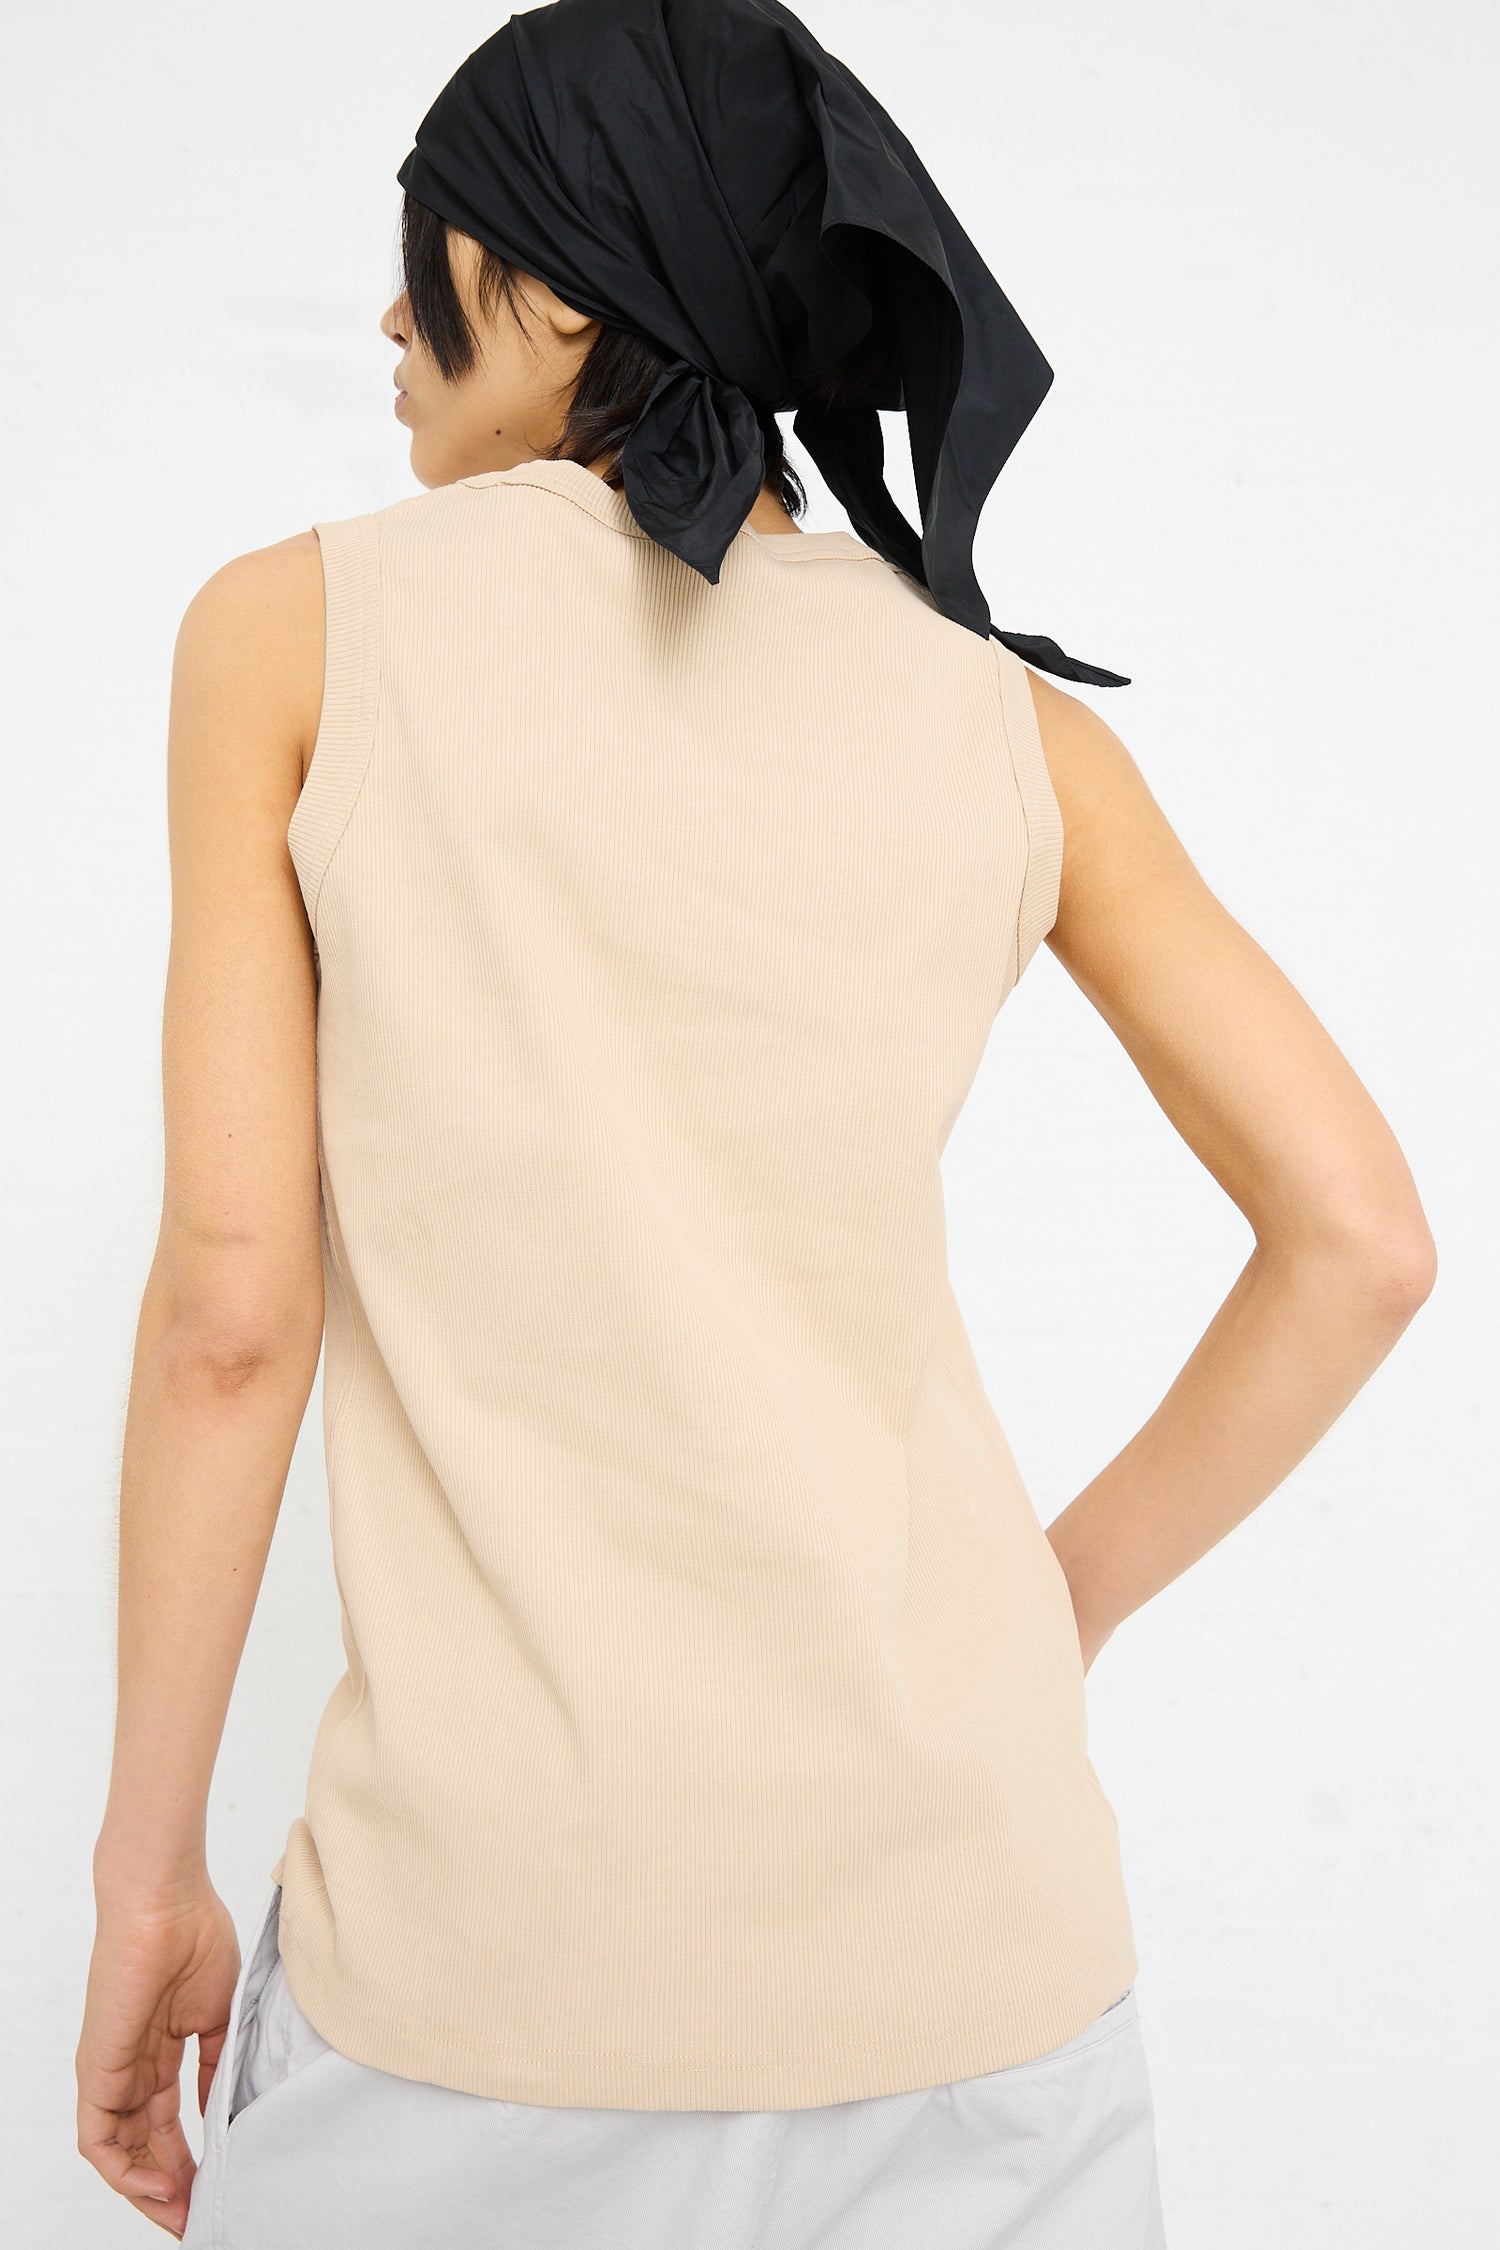 A person from behind wearing a beige Sofie D'Hoore rib knit tank in nude and a black headscarf.